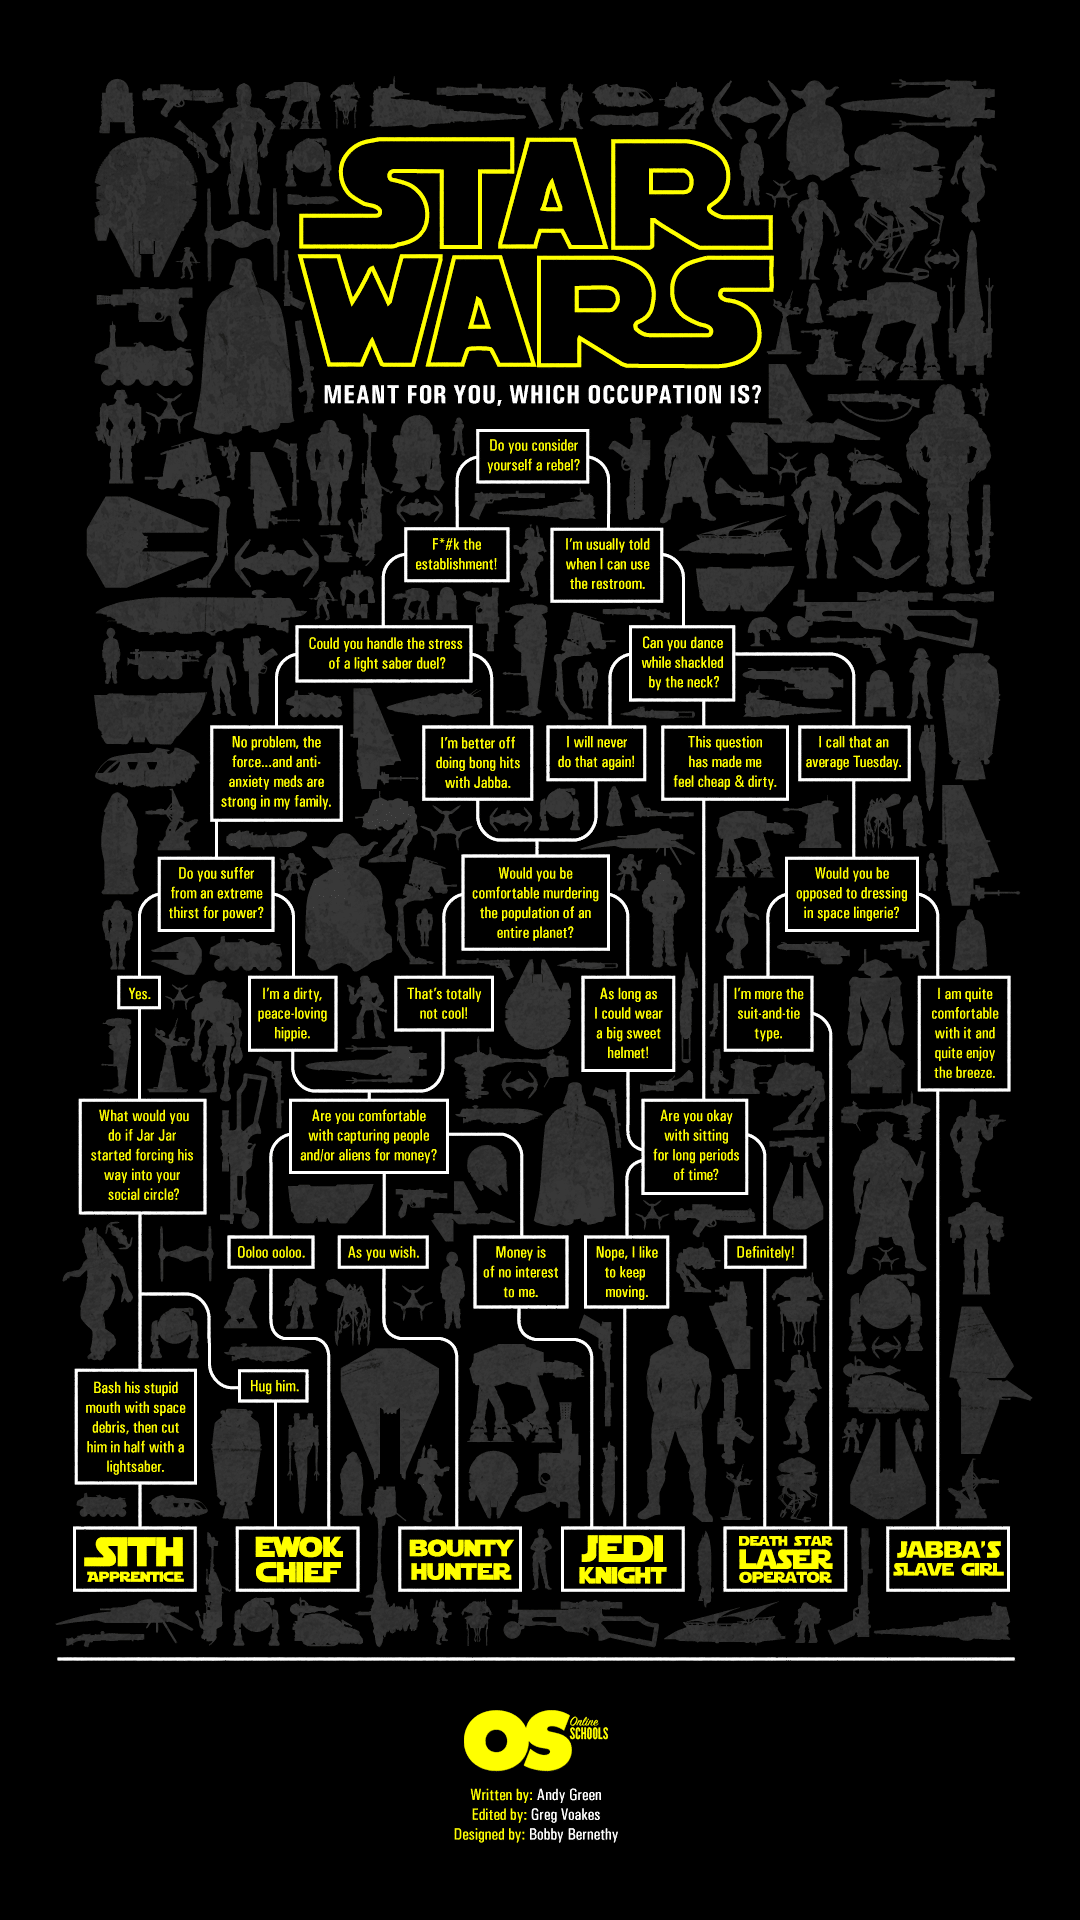 Star Wars Flow Chart: What Side Or Occupation Do You Belong To?